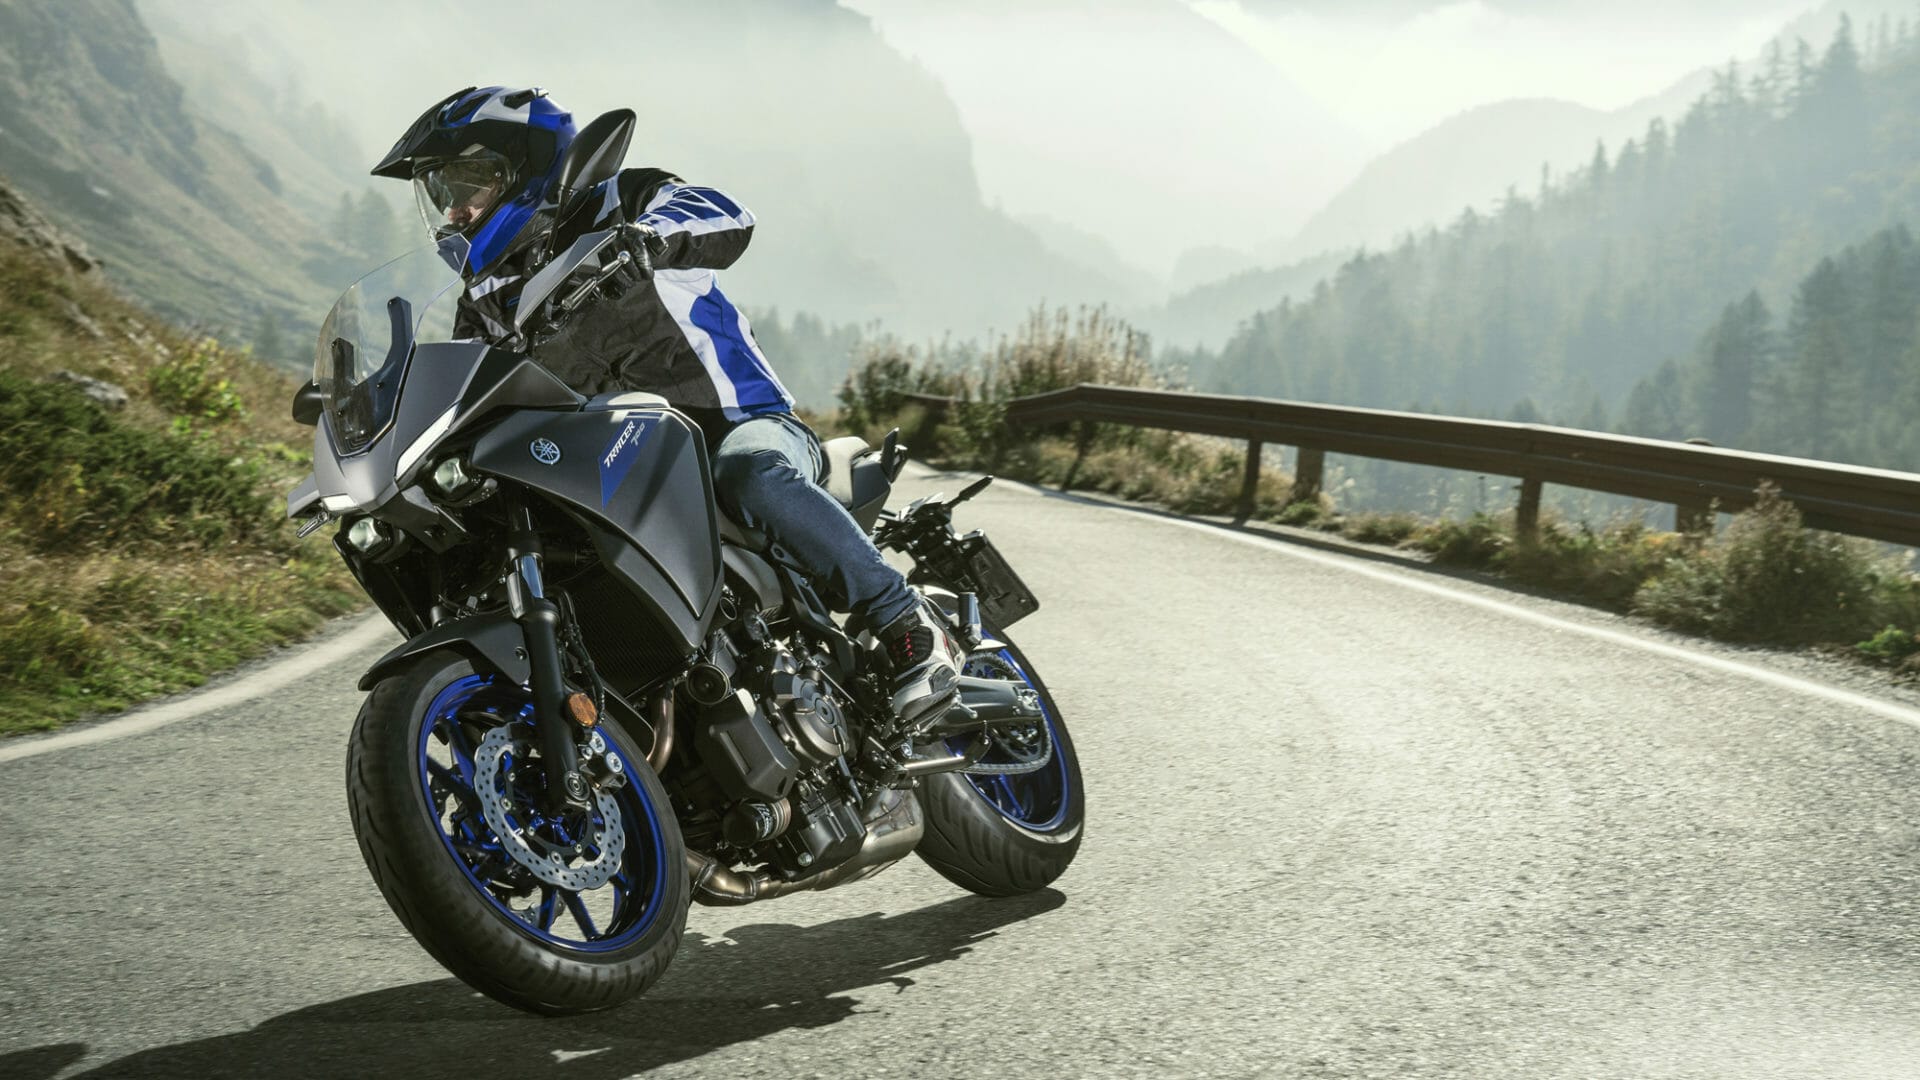 #Yamaha #Tracer700 presented
- also in the app Motorcycle News